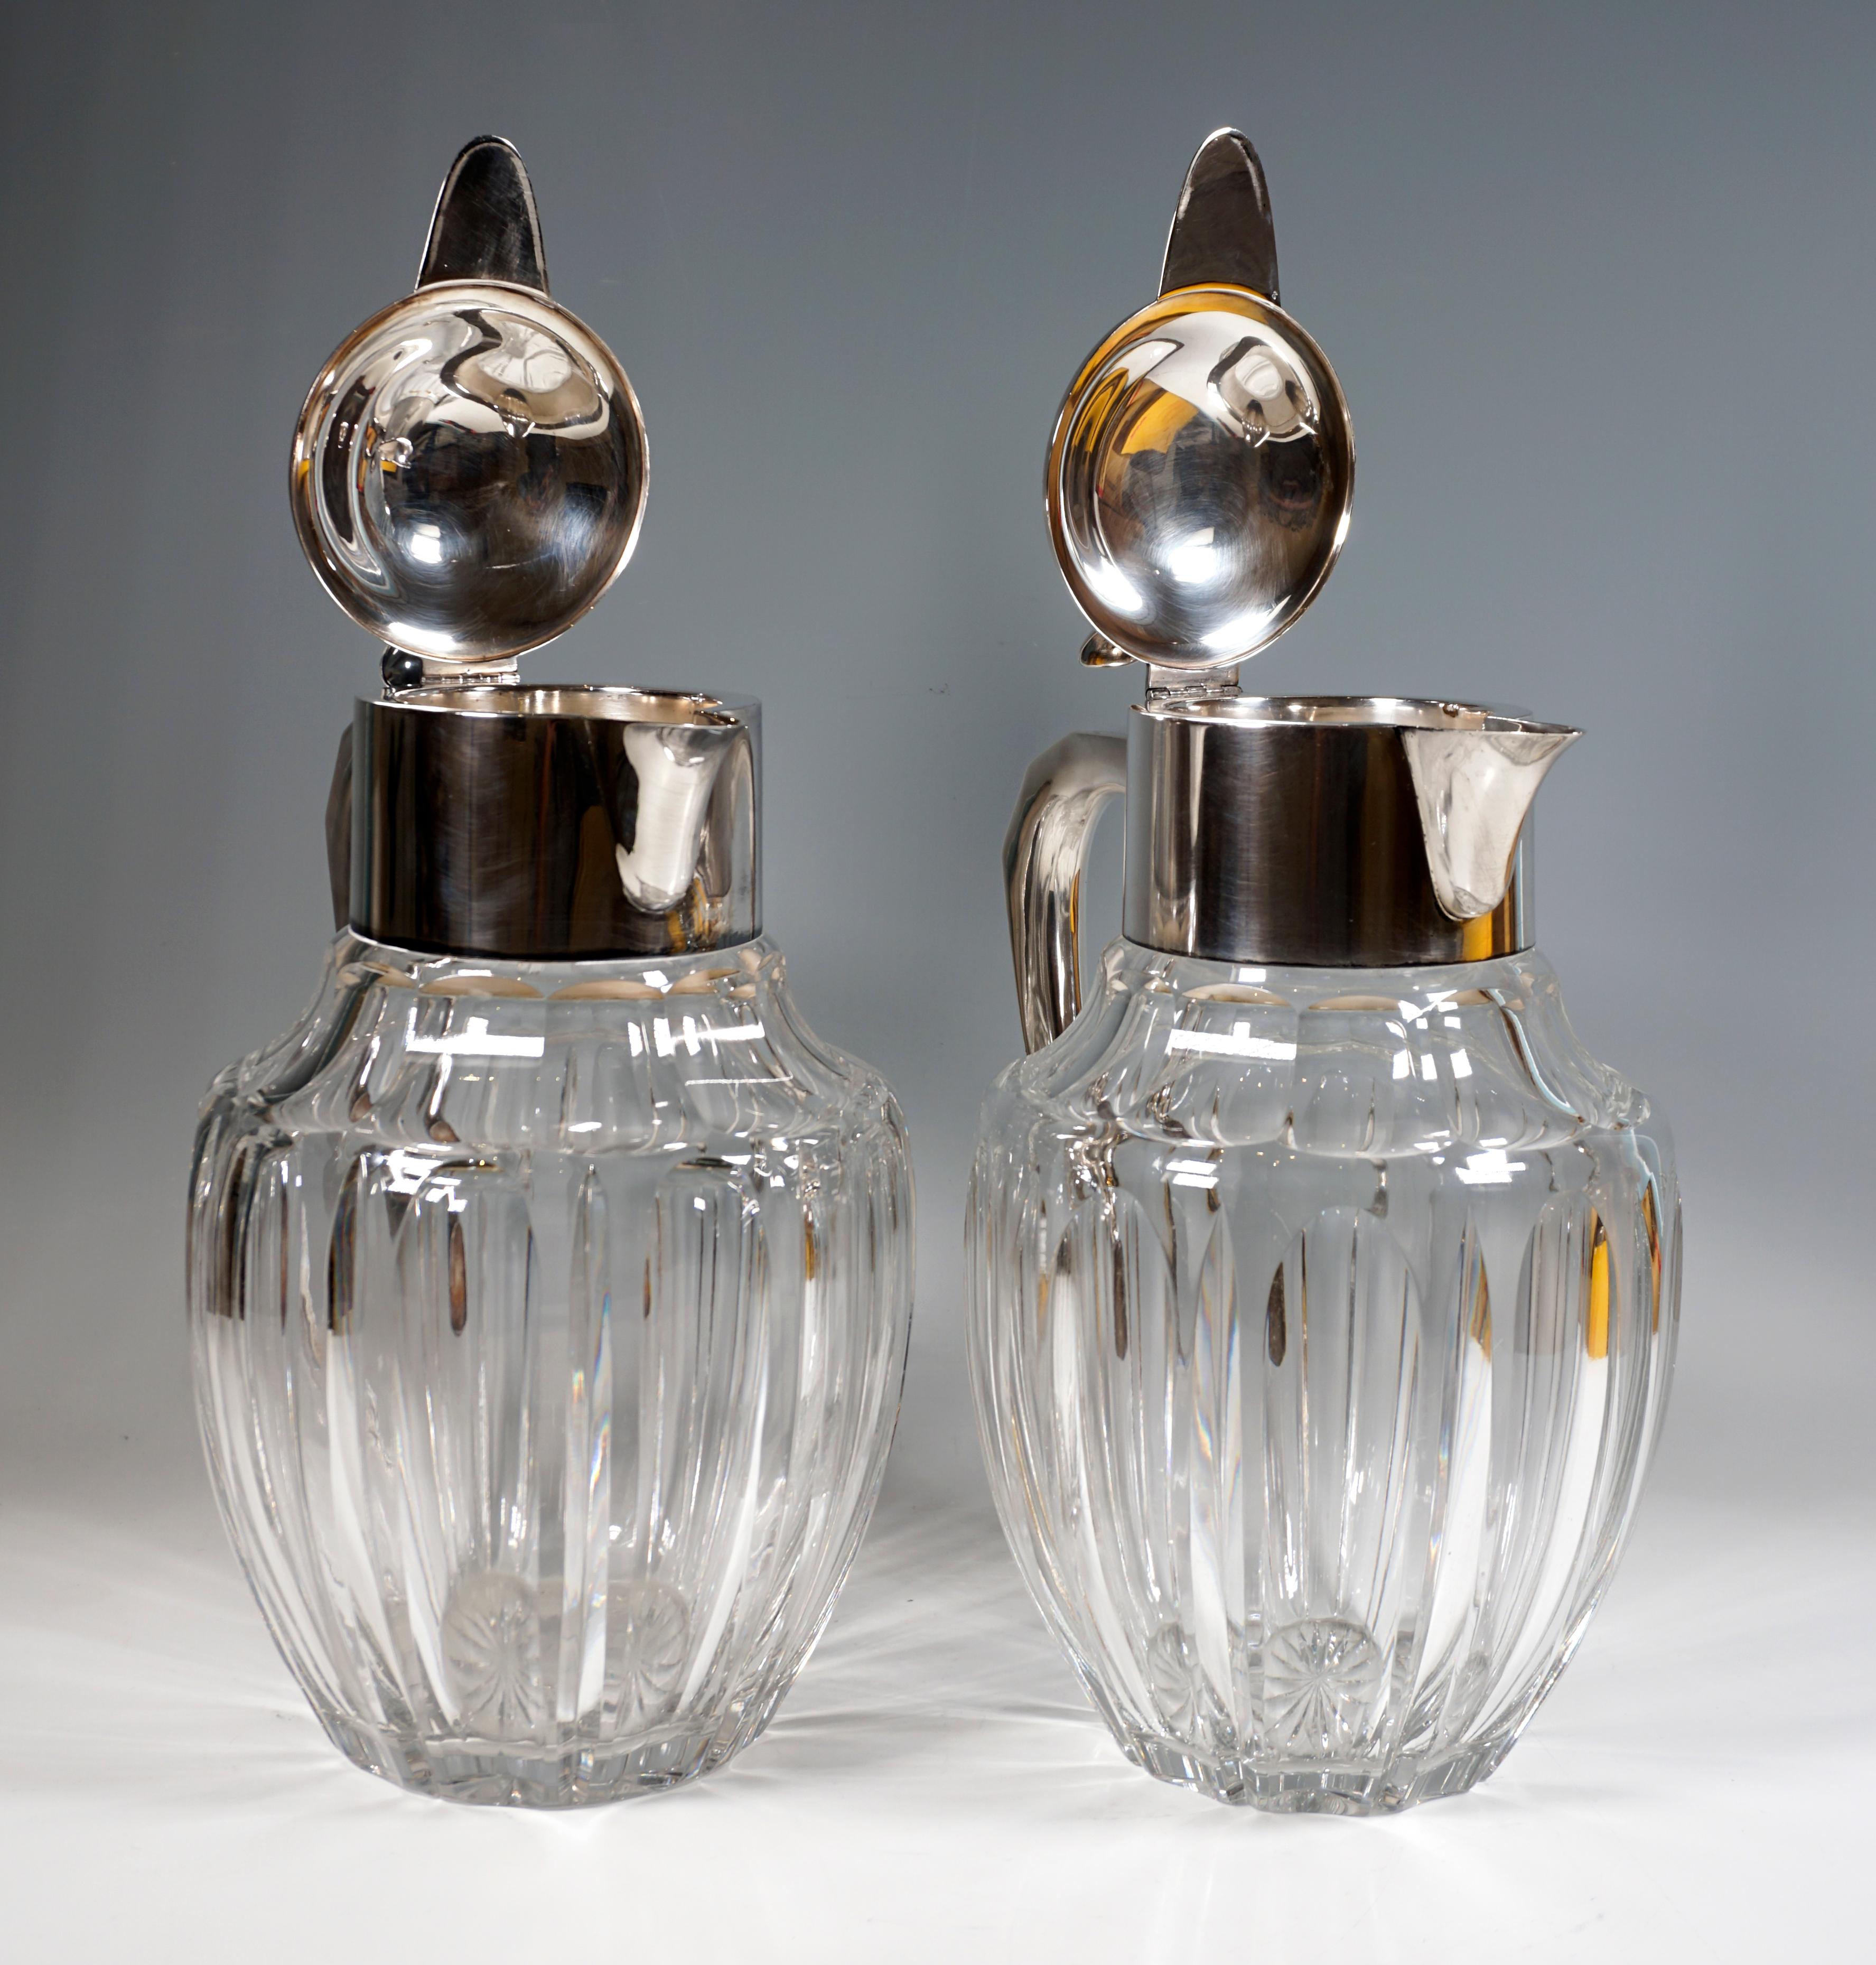 Faceted Pair Of Large Glass Carafes With Silver Mounts, Gebrüder Deyhle, Germany c. 1910 For Sale